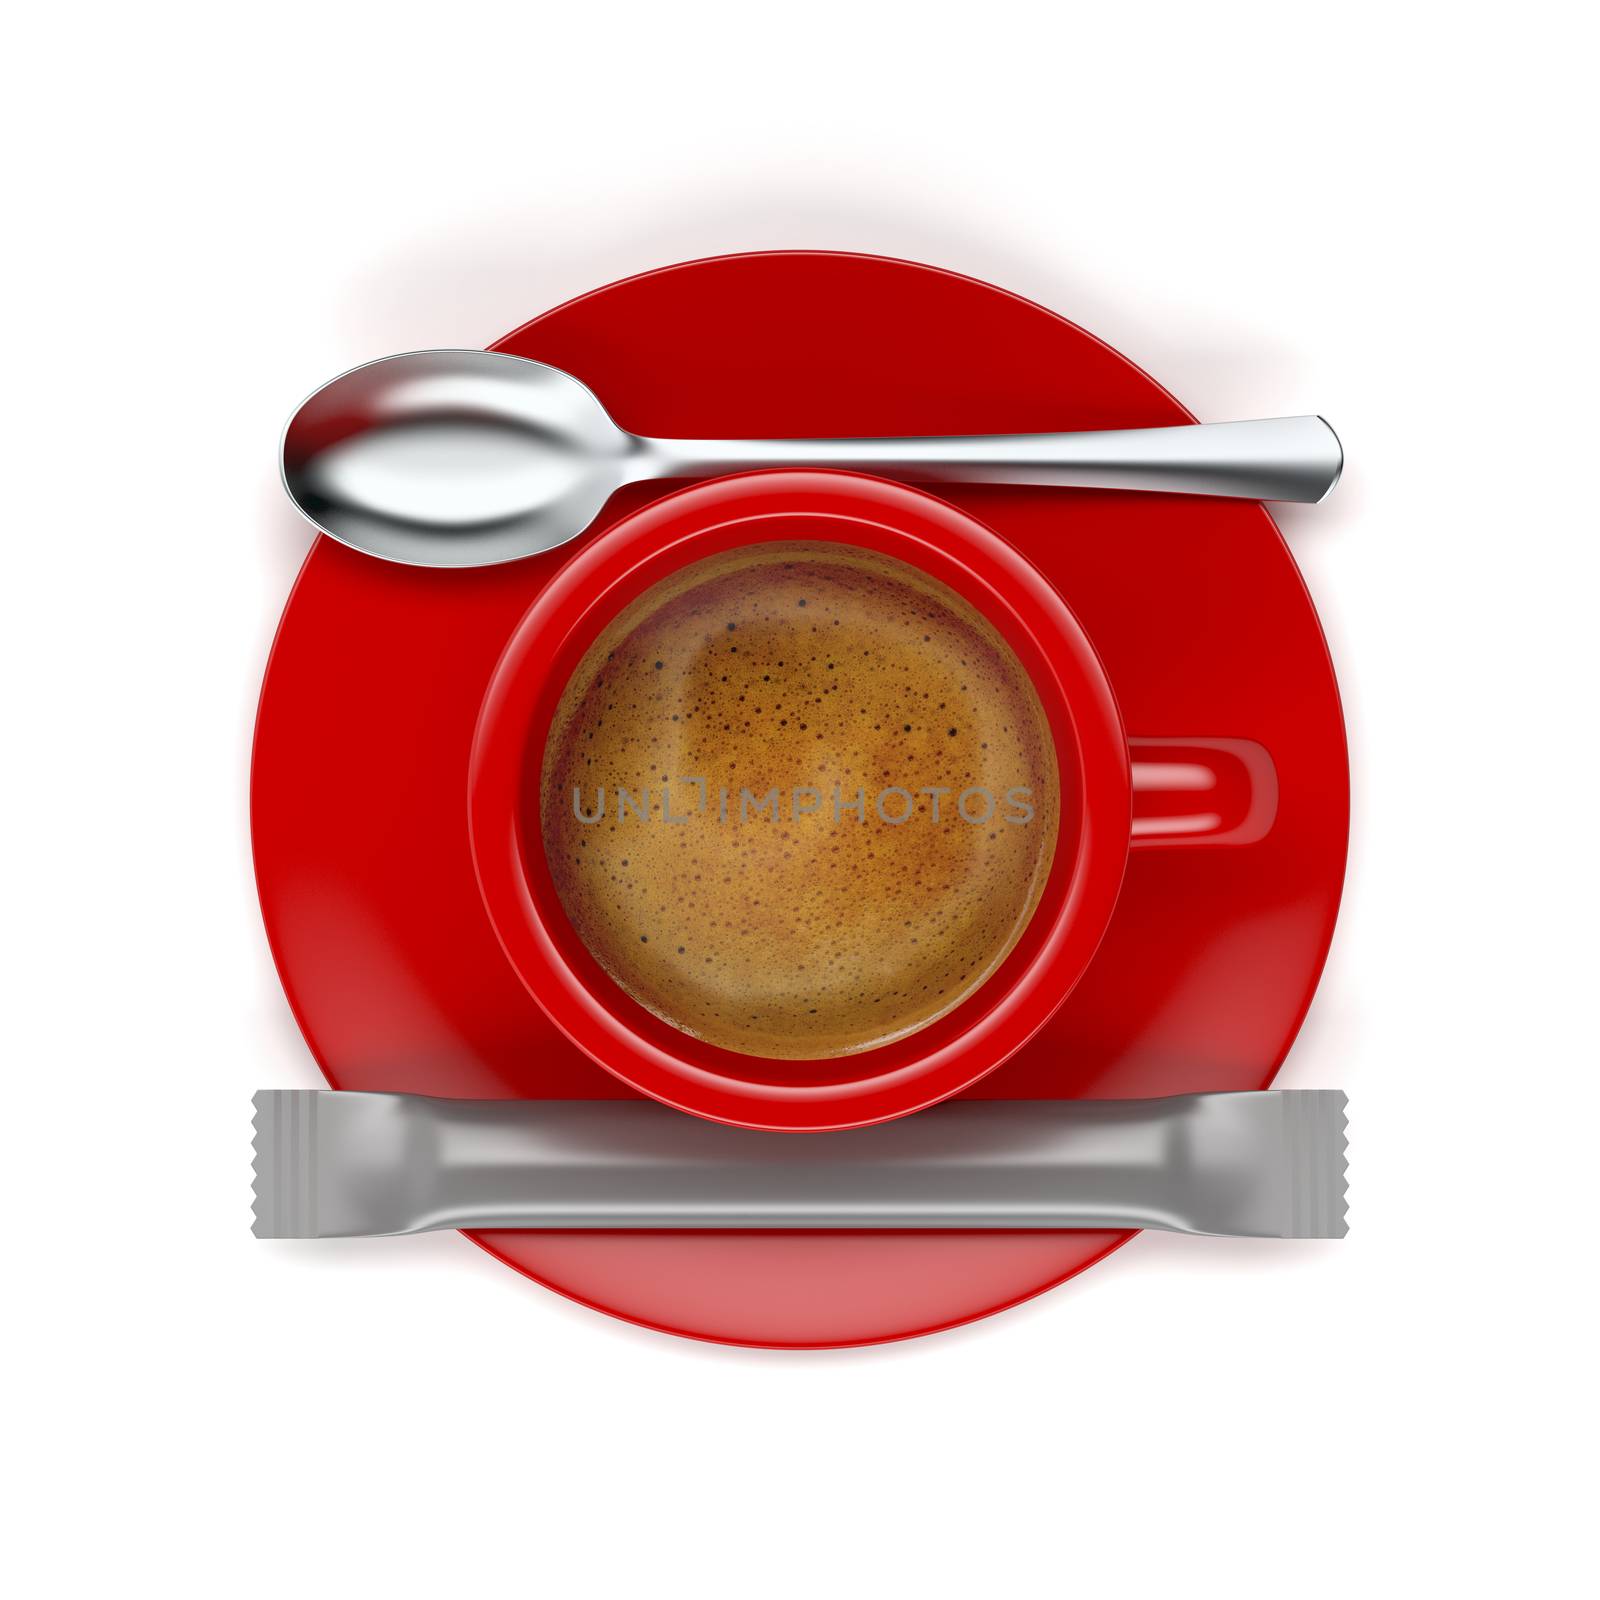 Top view of hot aromatic espresso coffee on white background